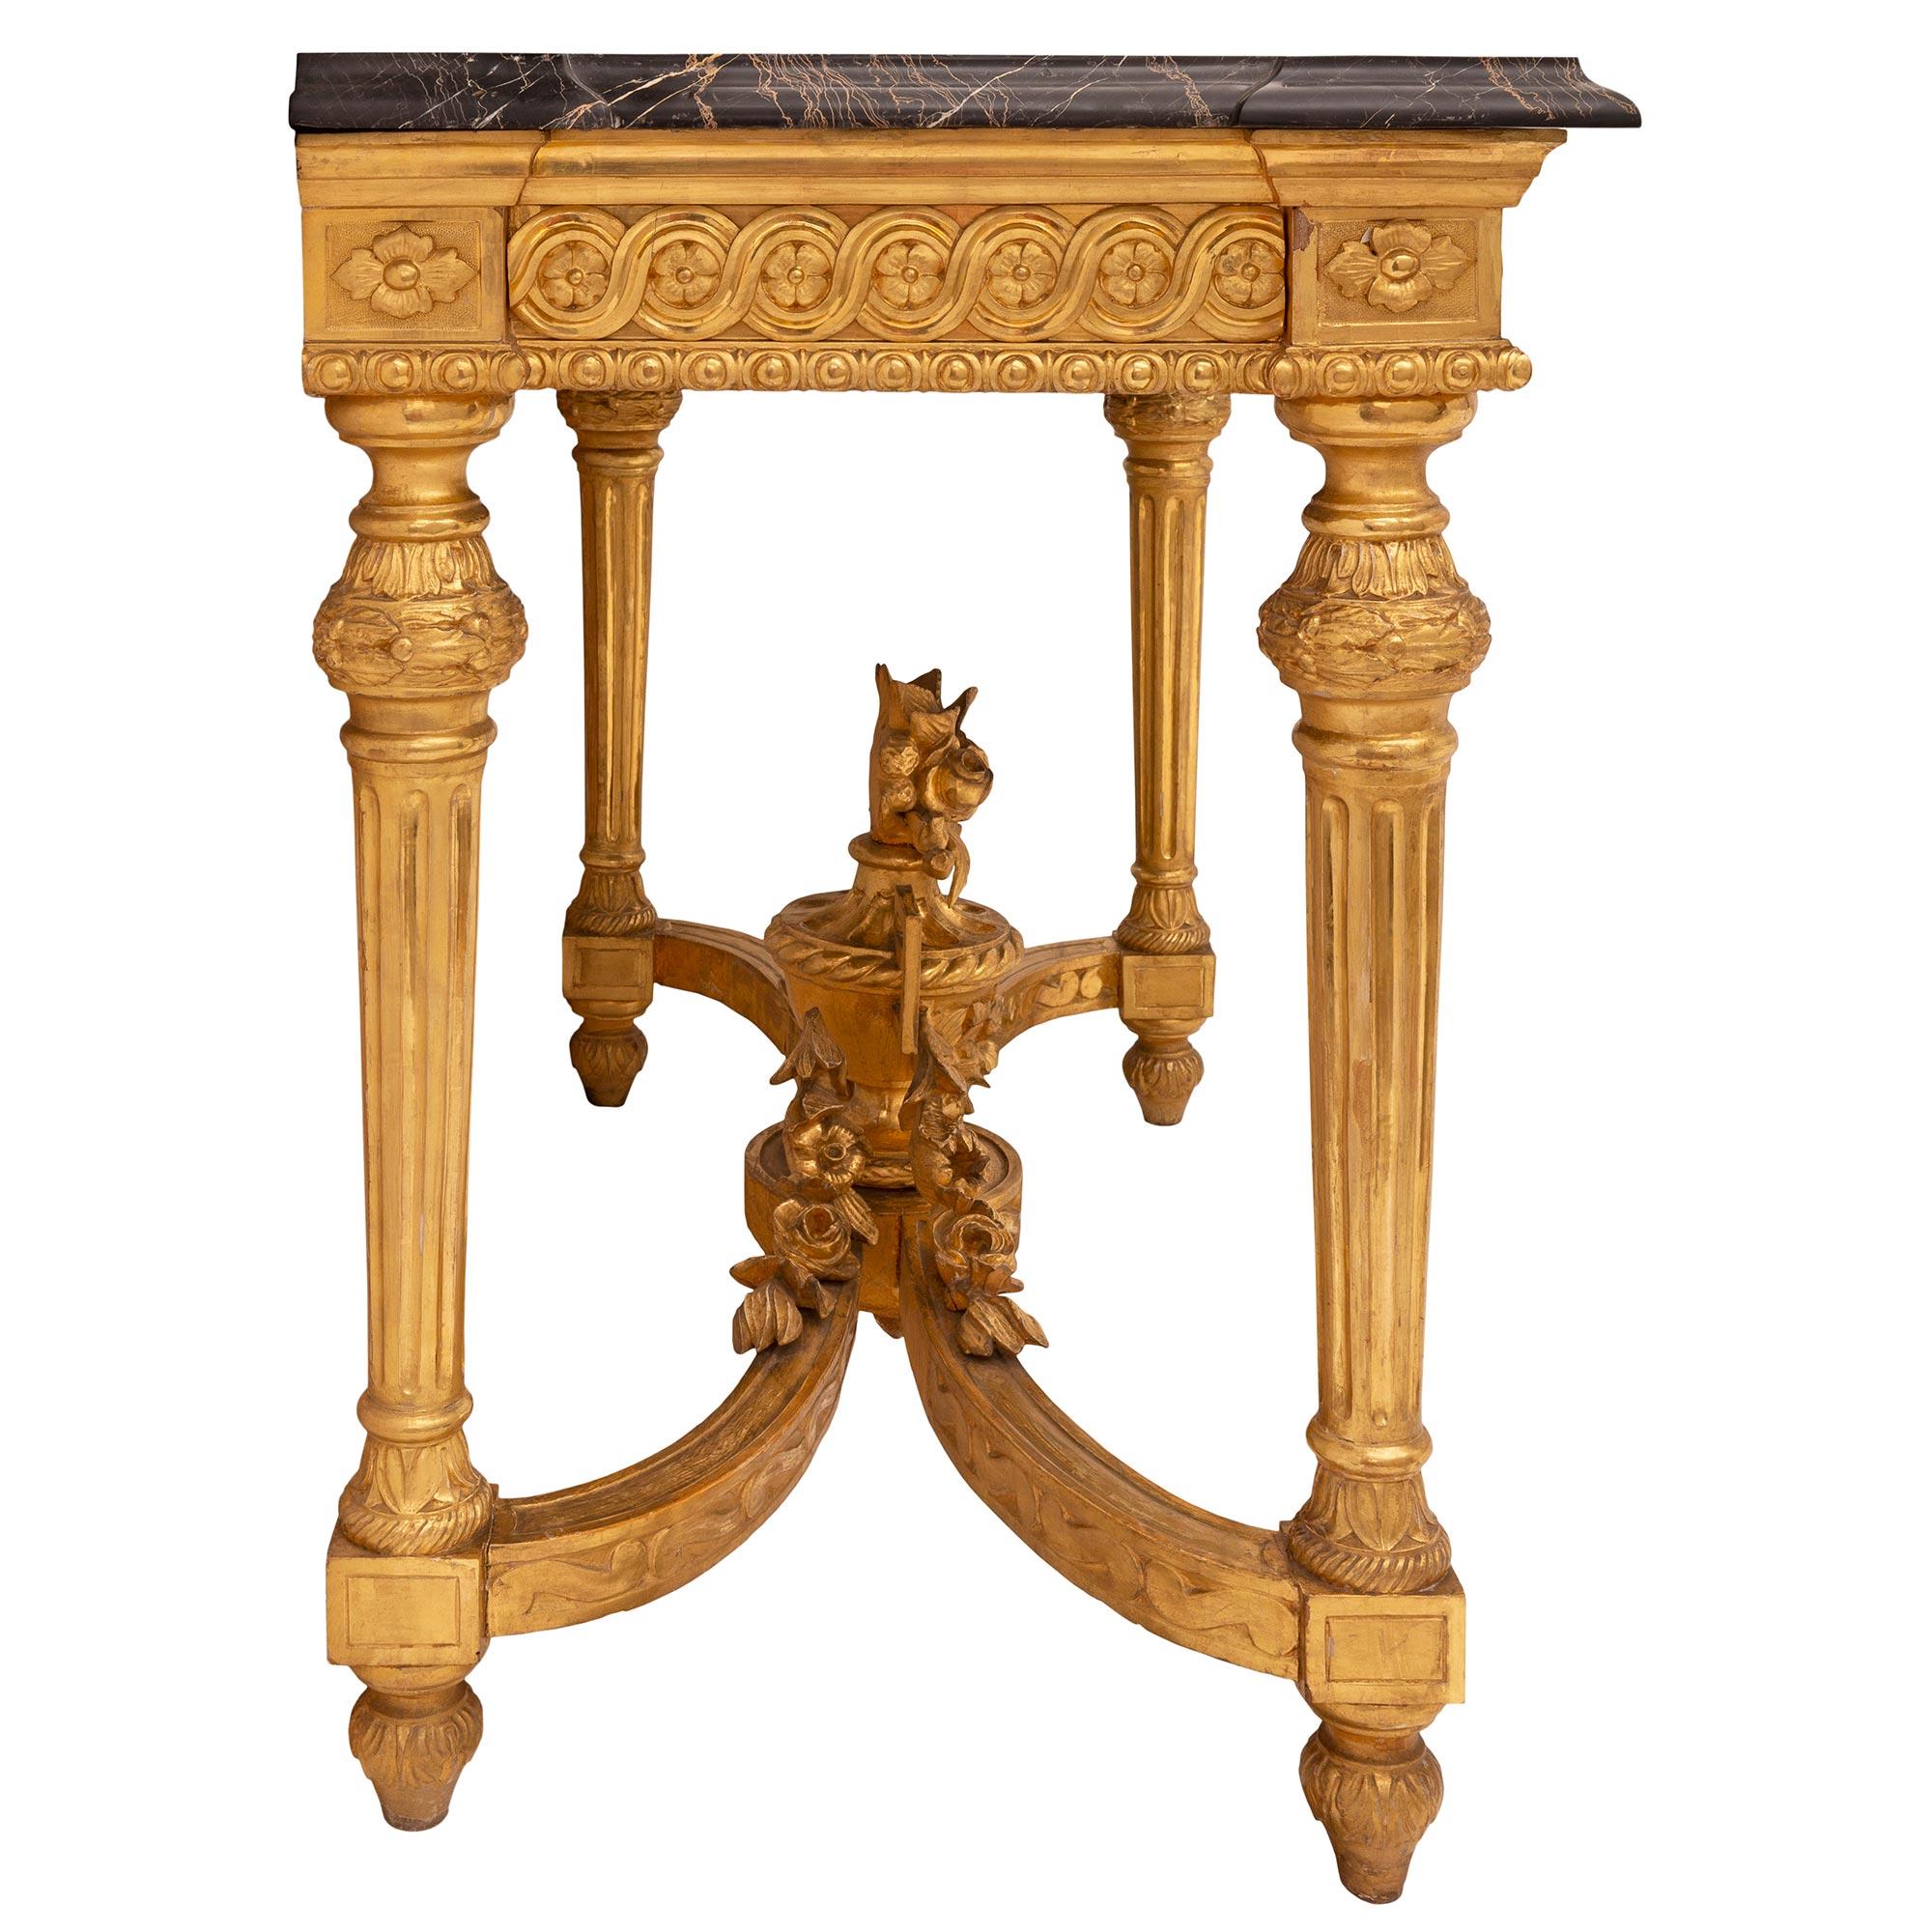 Marble Pair of Italian Mid-19th Century Louis XVI Style Giltwood Freestanding Consoles For Sale